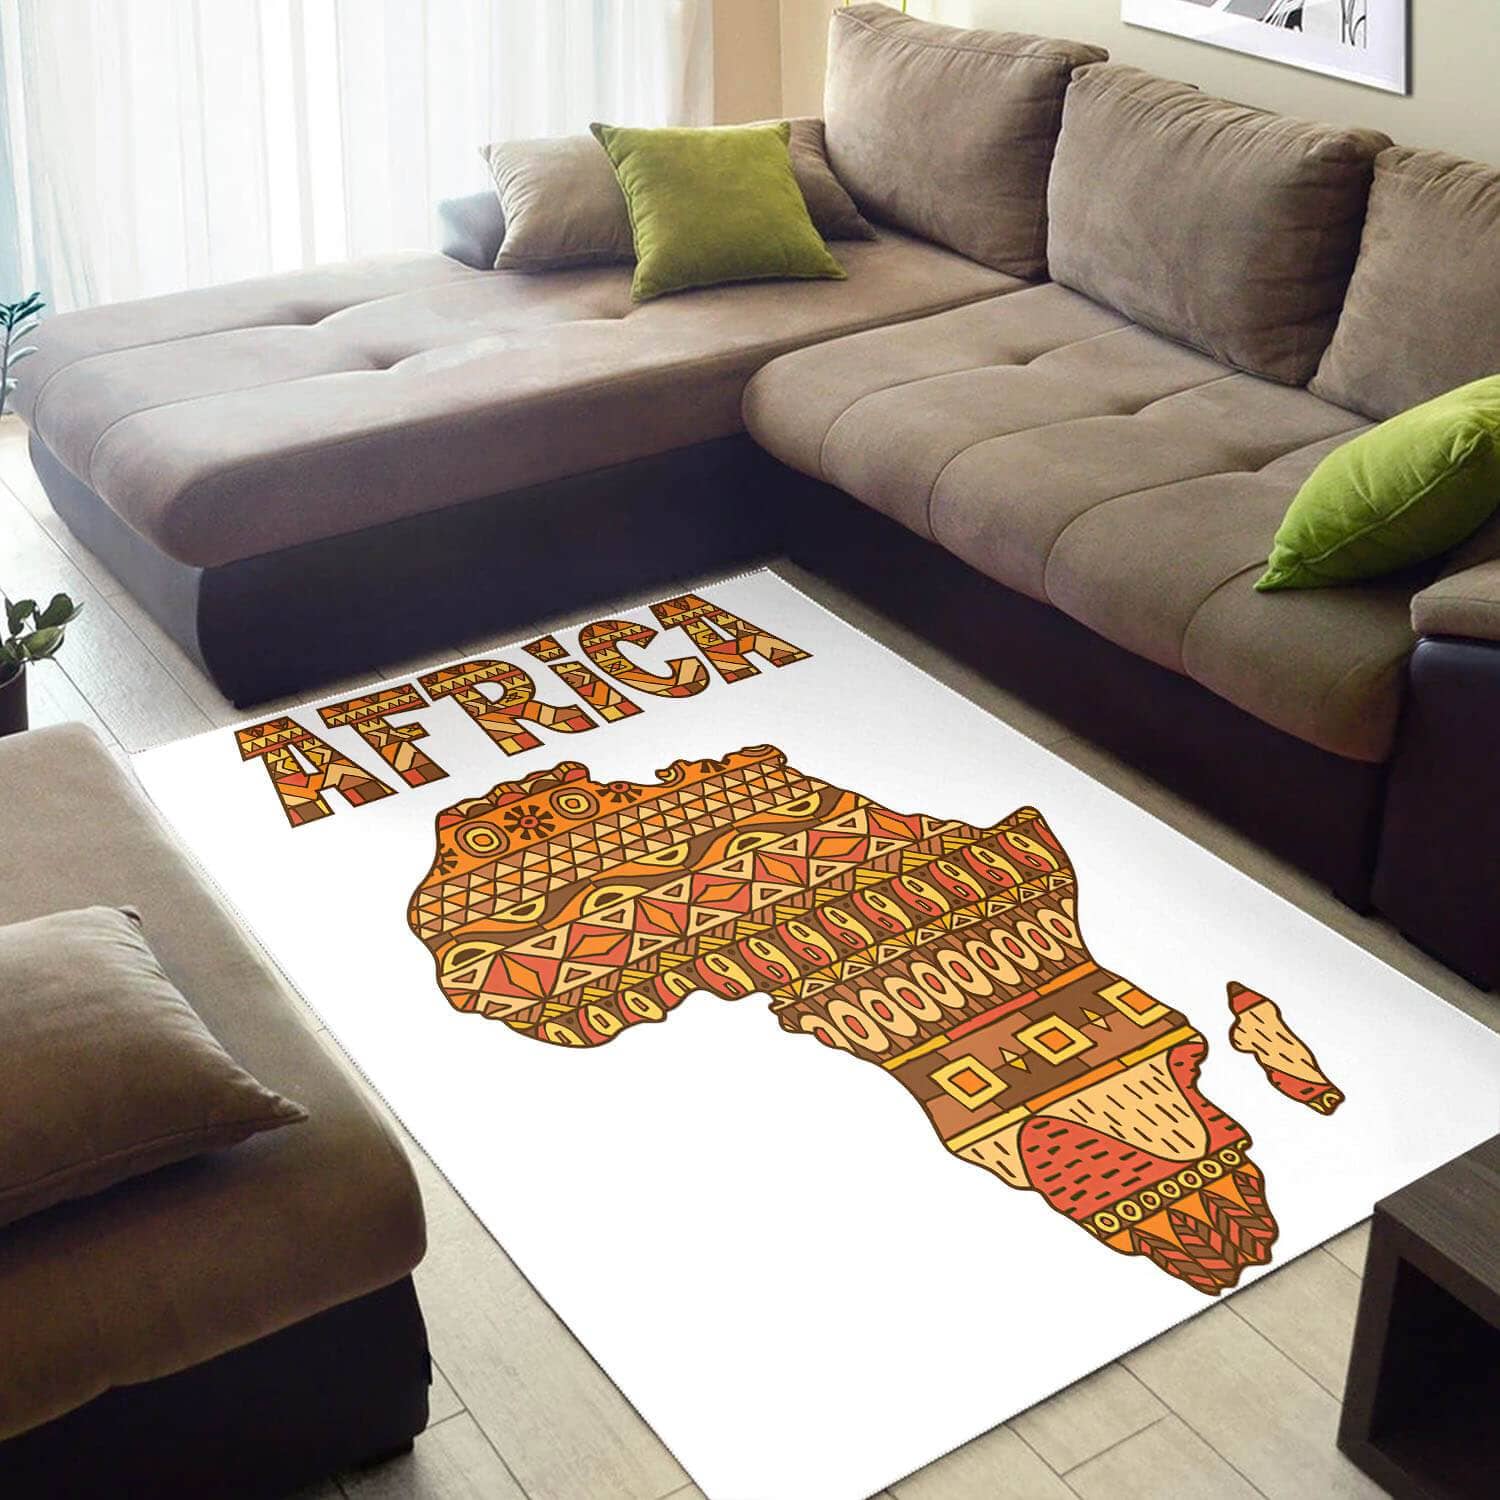 Trendy African Style Amazing Black History Month Afrocentric Pattern Art Design Floor Carpet House Rug